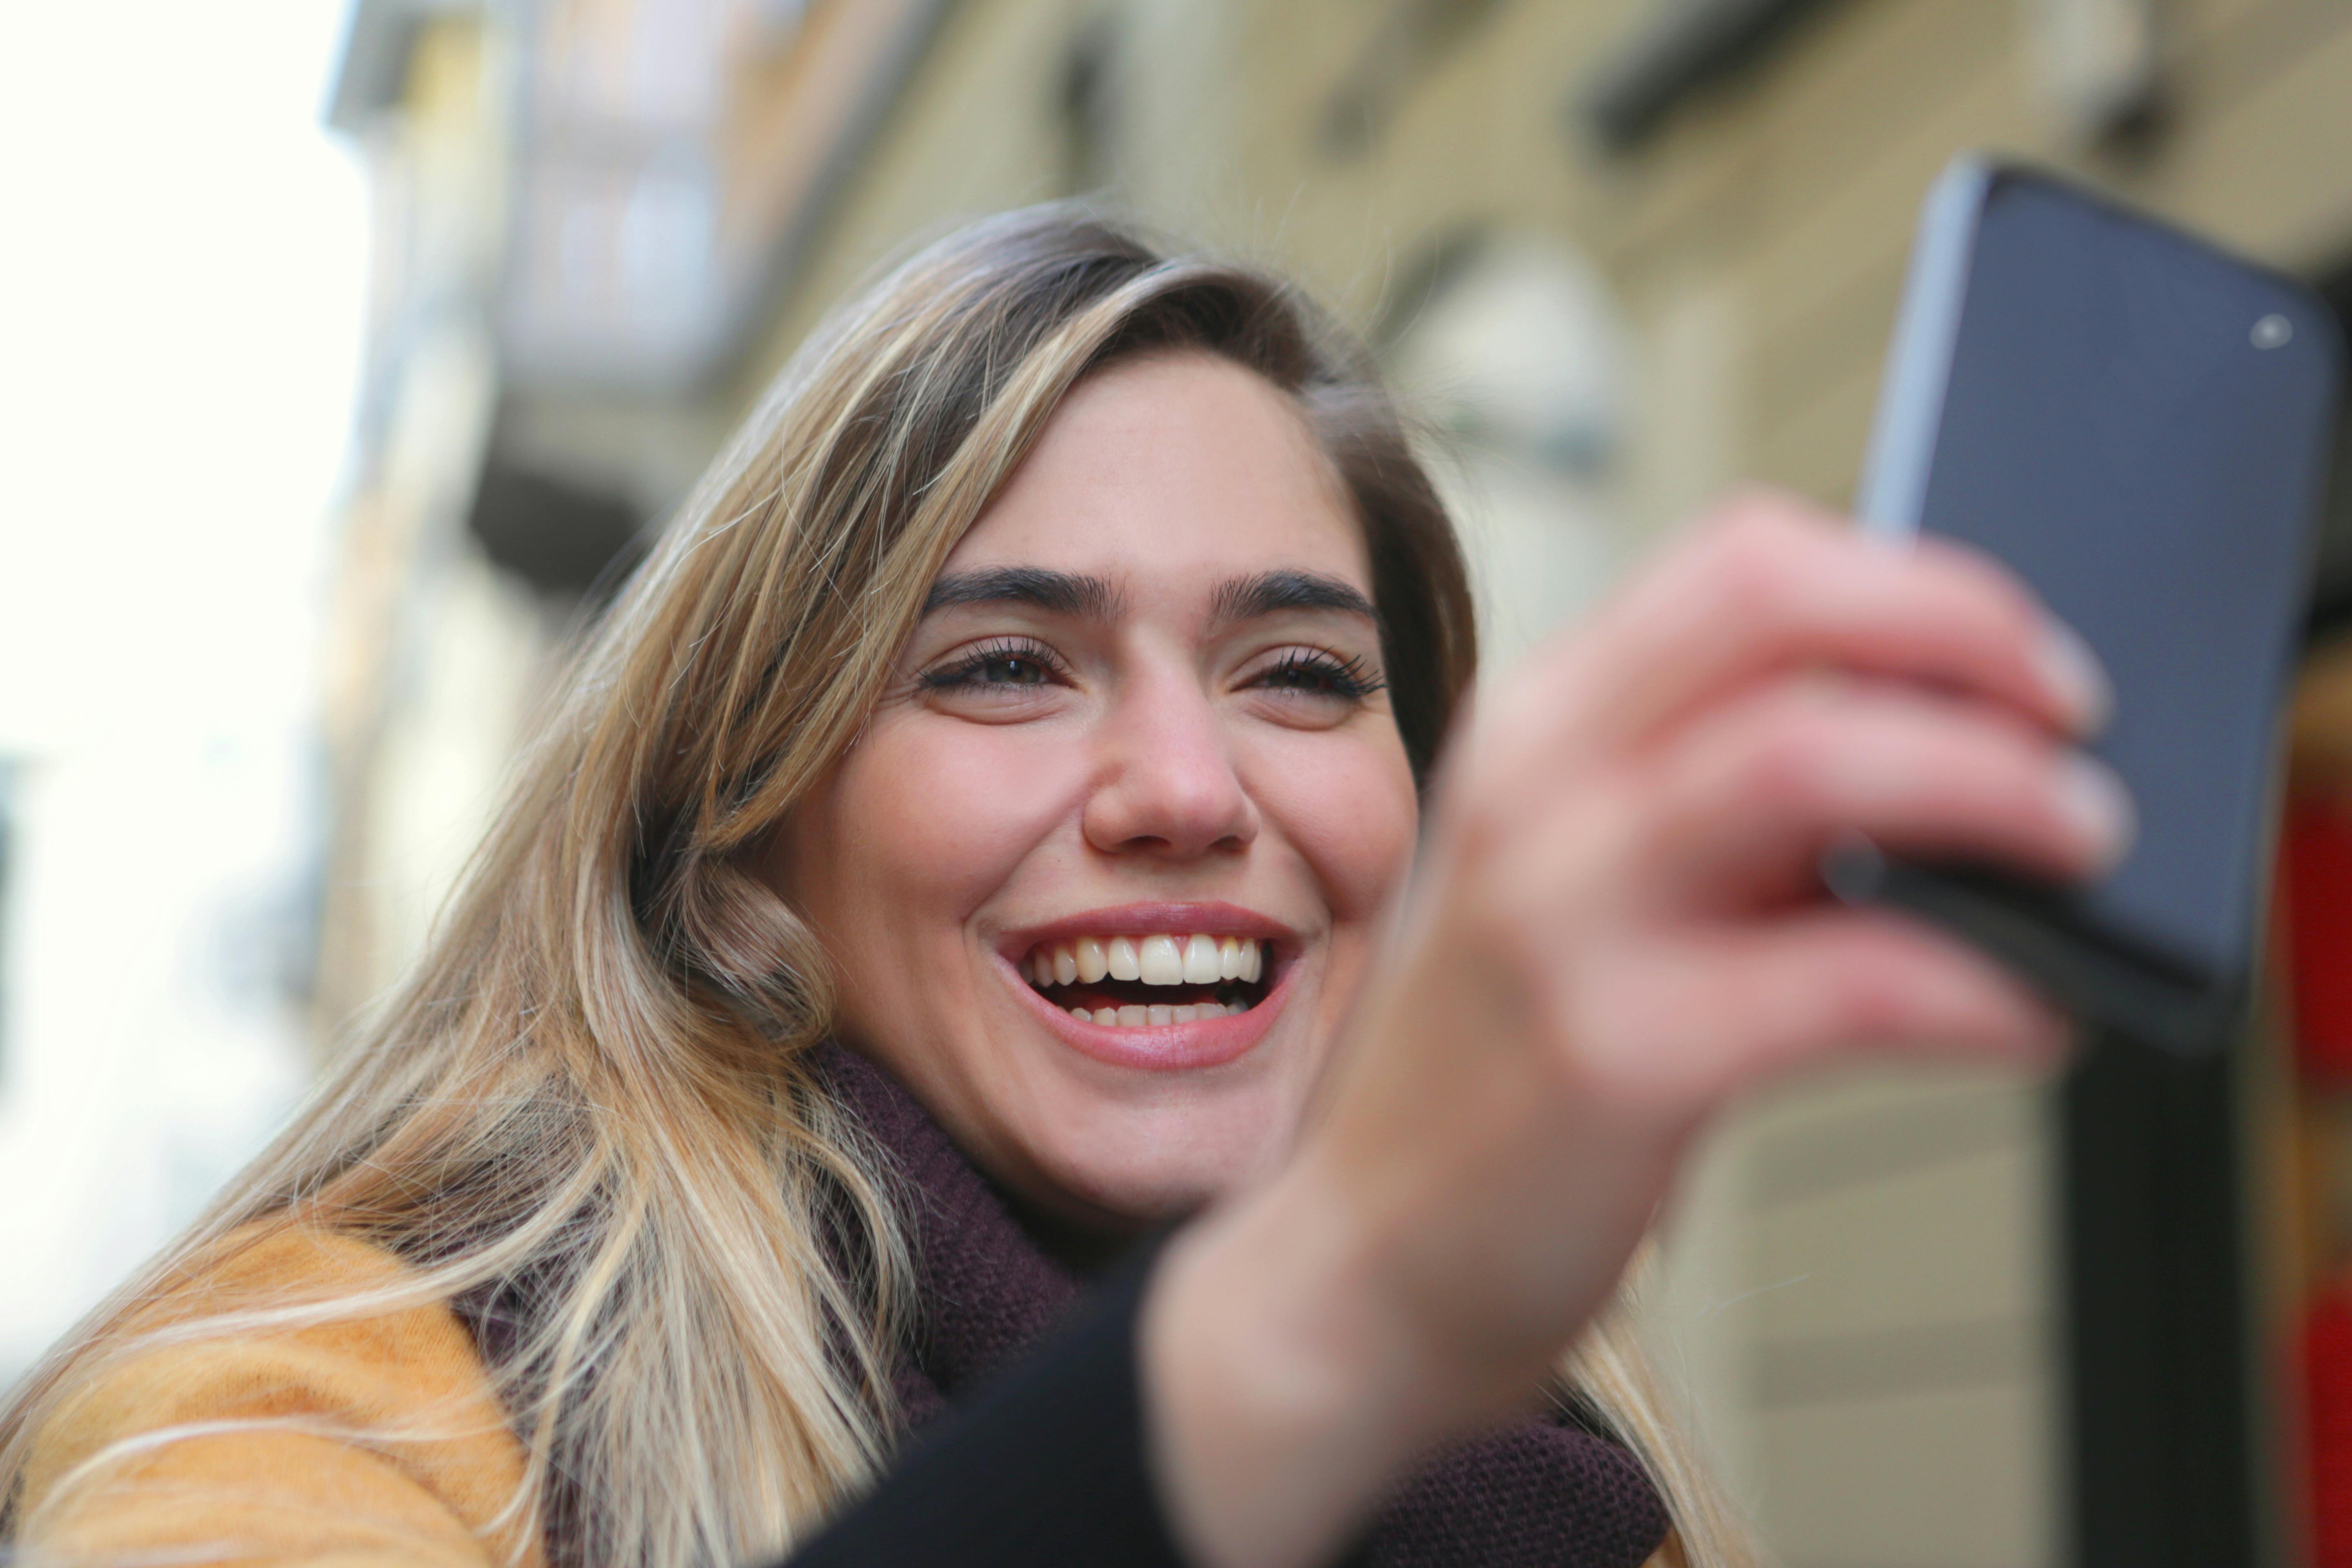 A woman laughing while looking at her phone | Source: Pexels